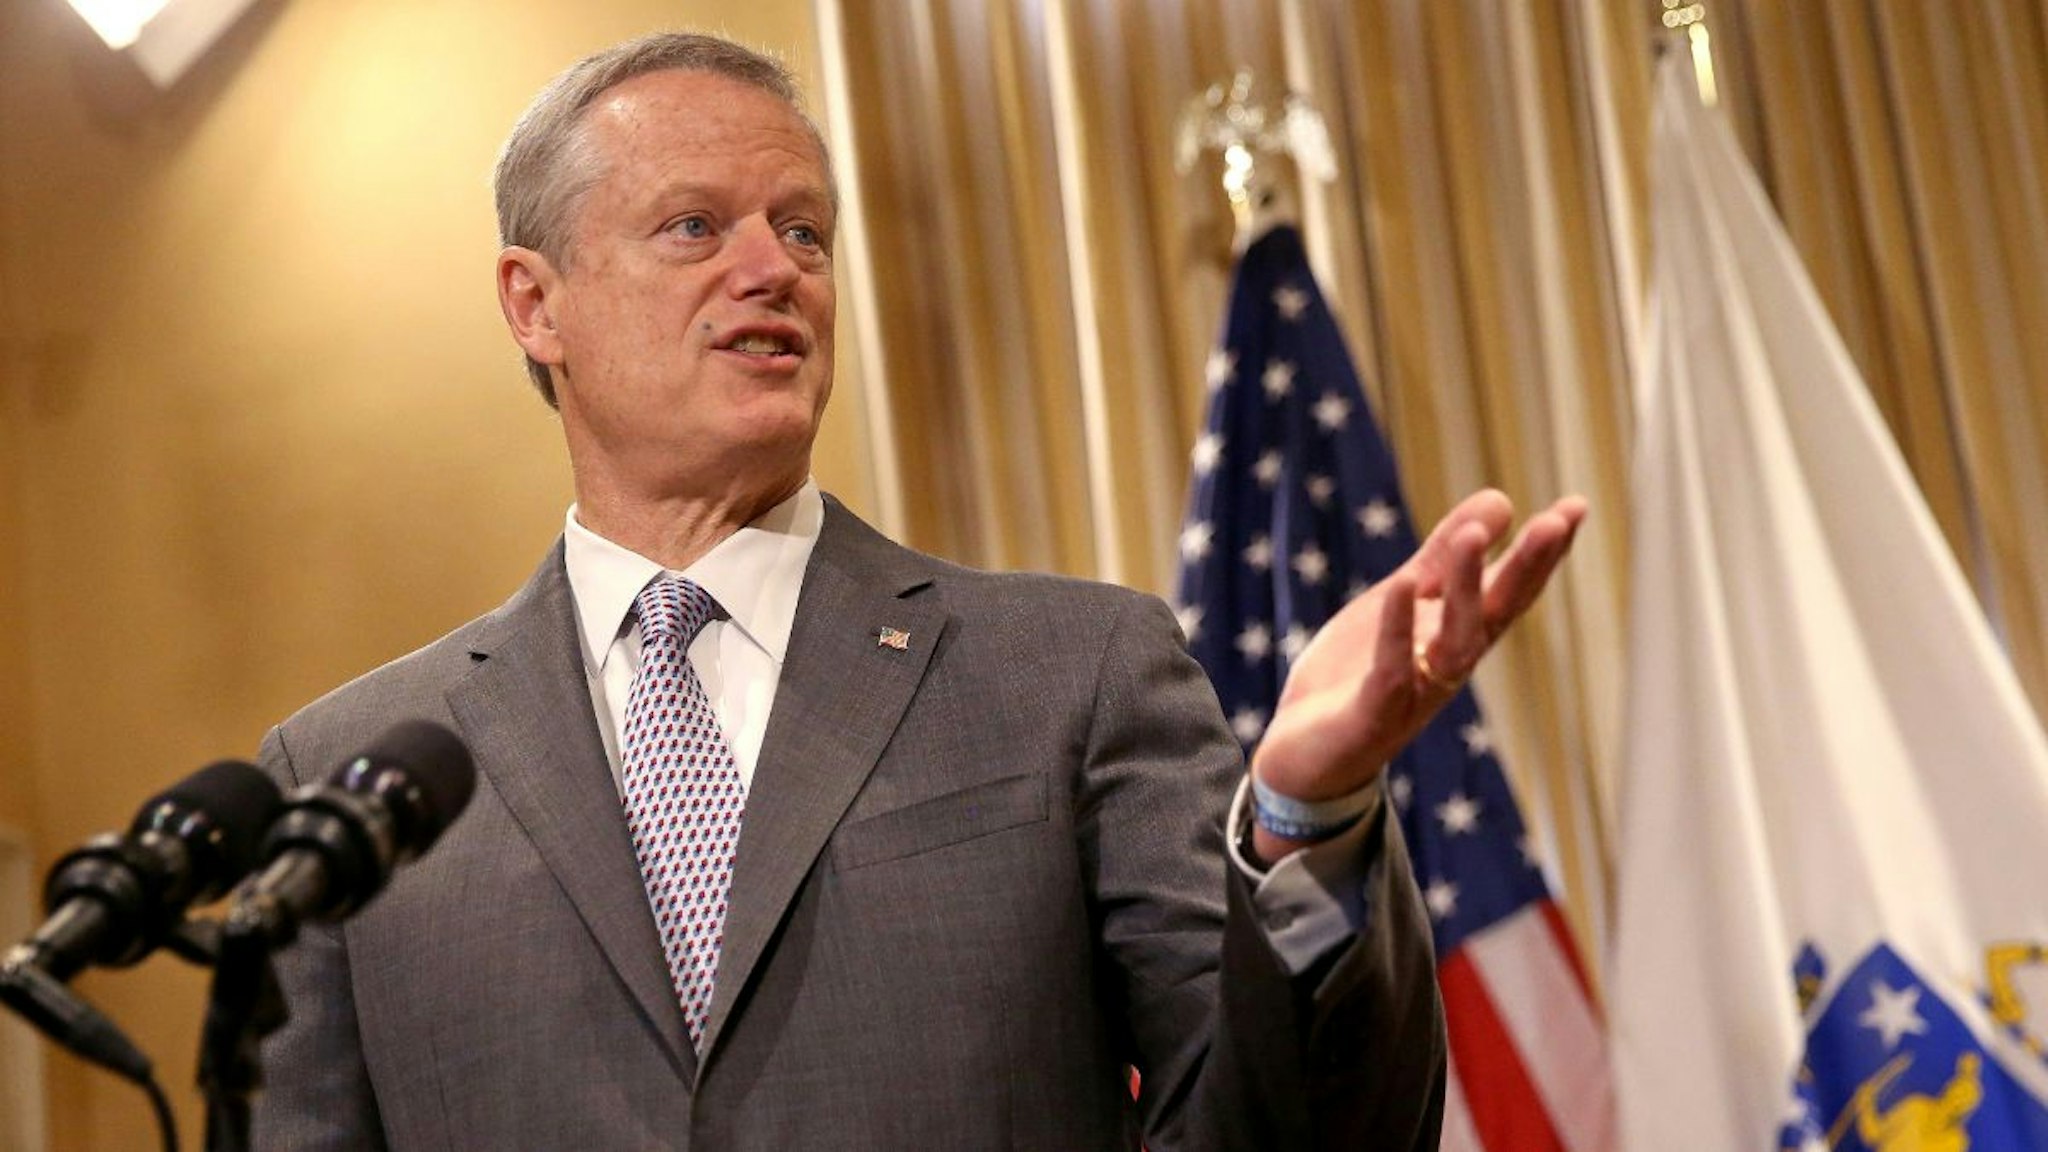 Governor Charlie Baker speaks at a press conference on tax relief proposals at the State House on June 27, 2022 in Boston, Massachusetts.